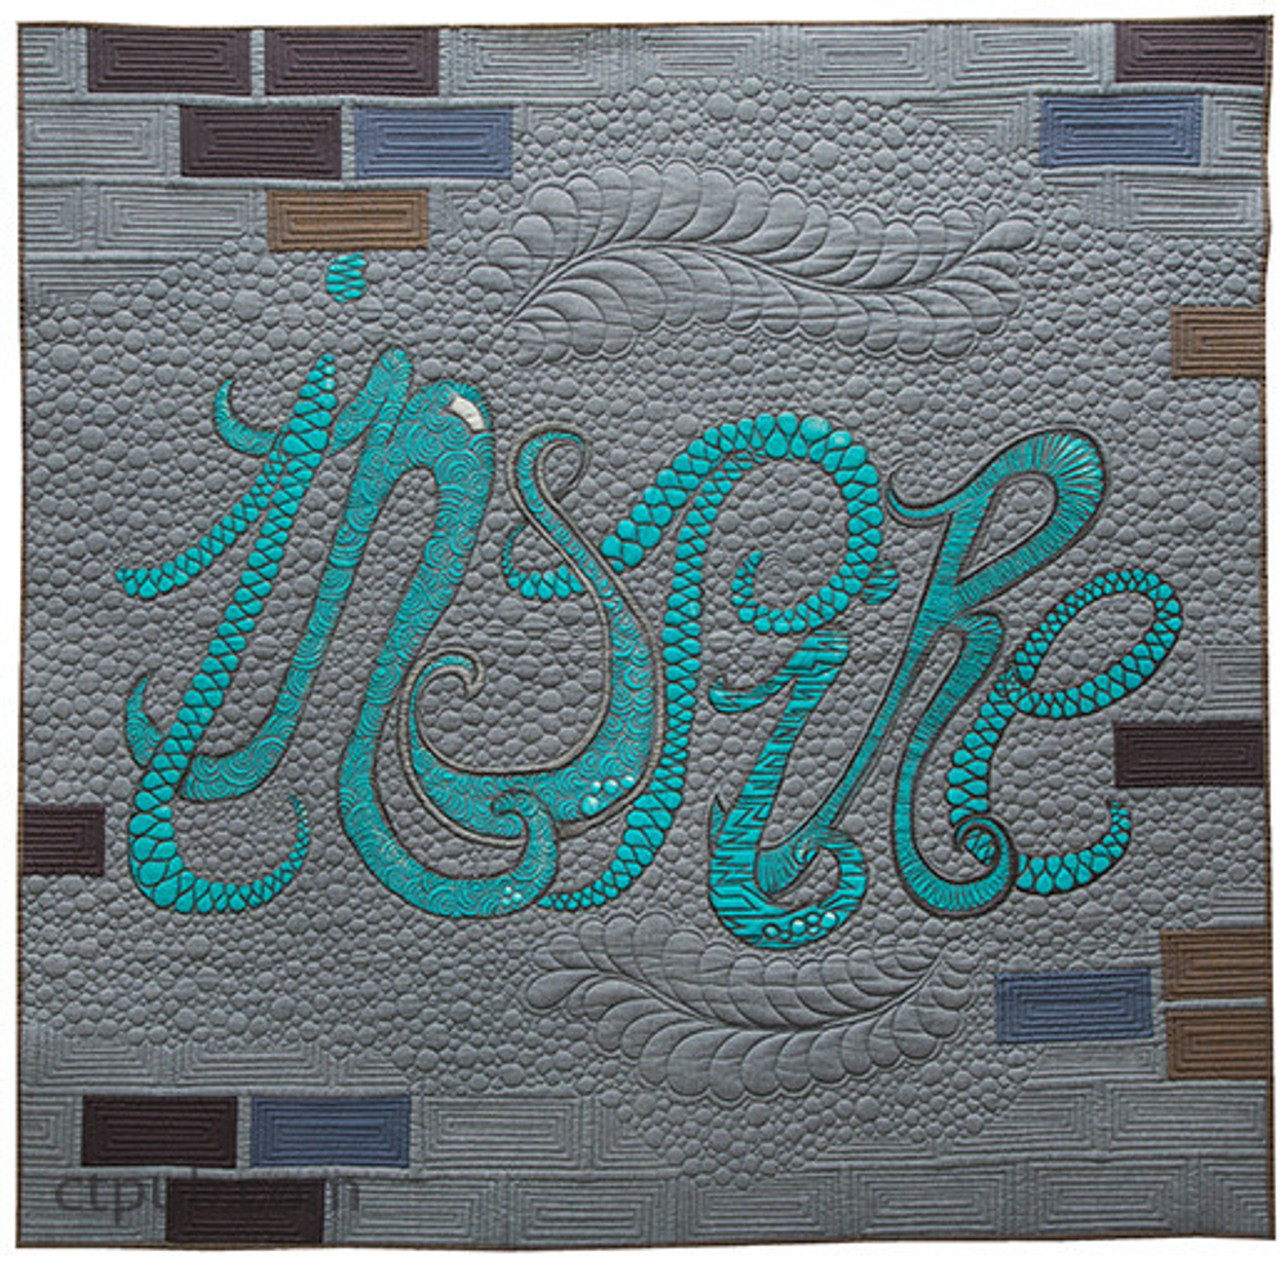 Hera Marker – Quilting Is My Therapy